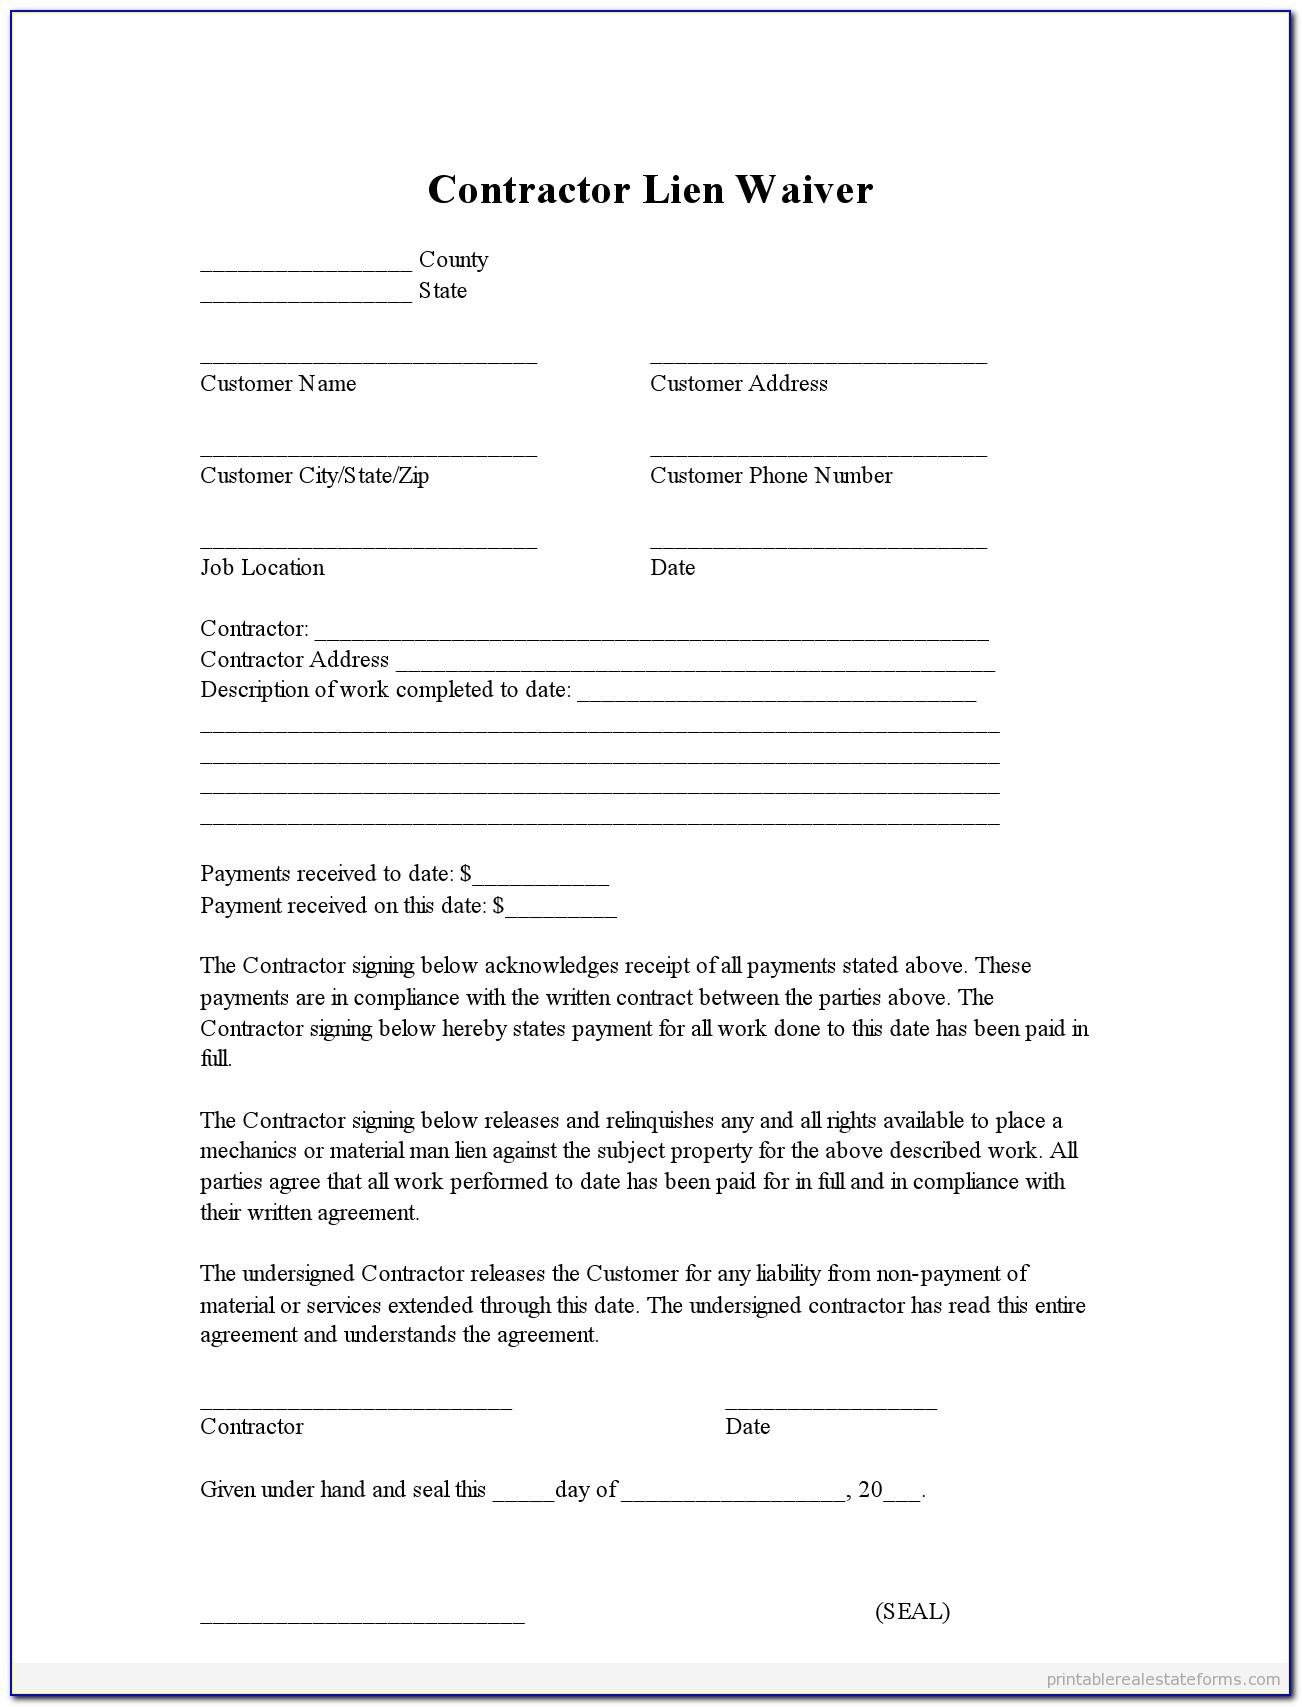 conditional-lien-waiver-form-texas